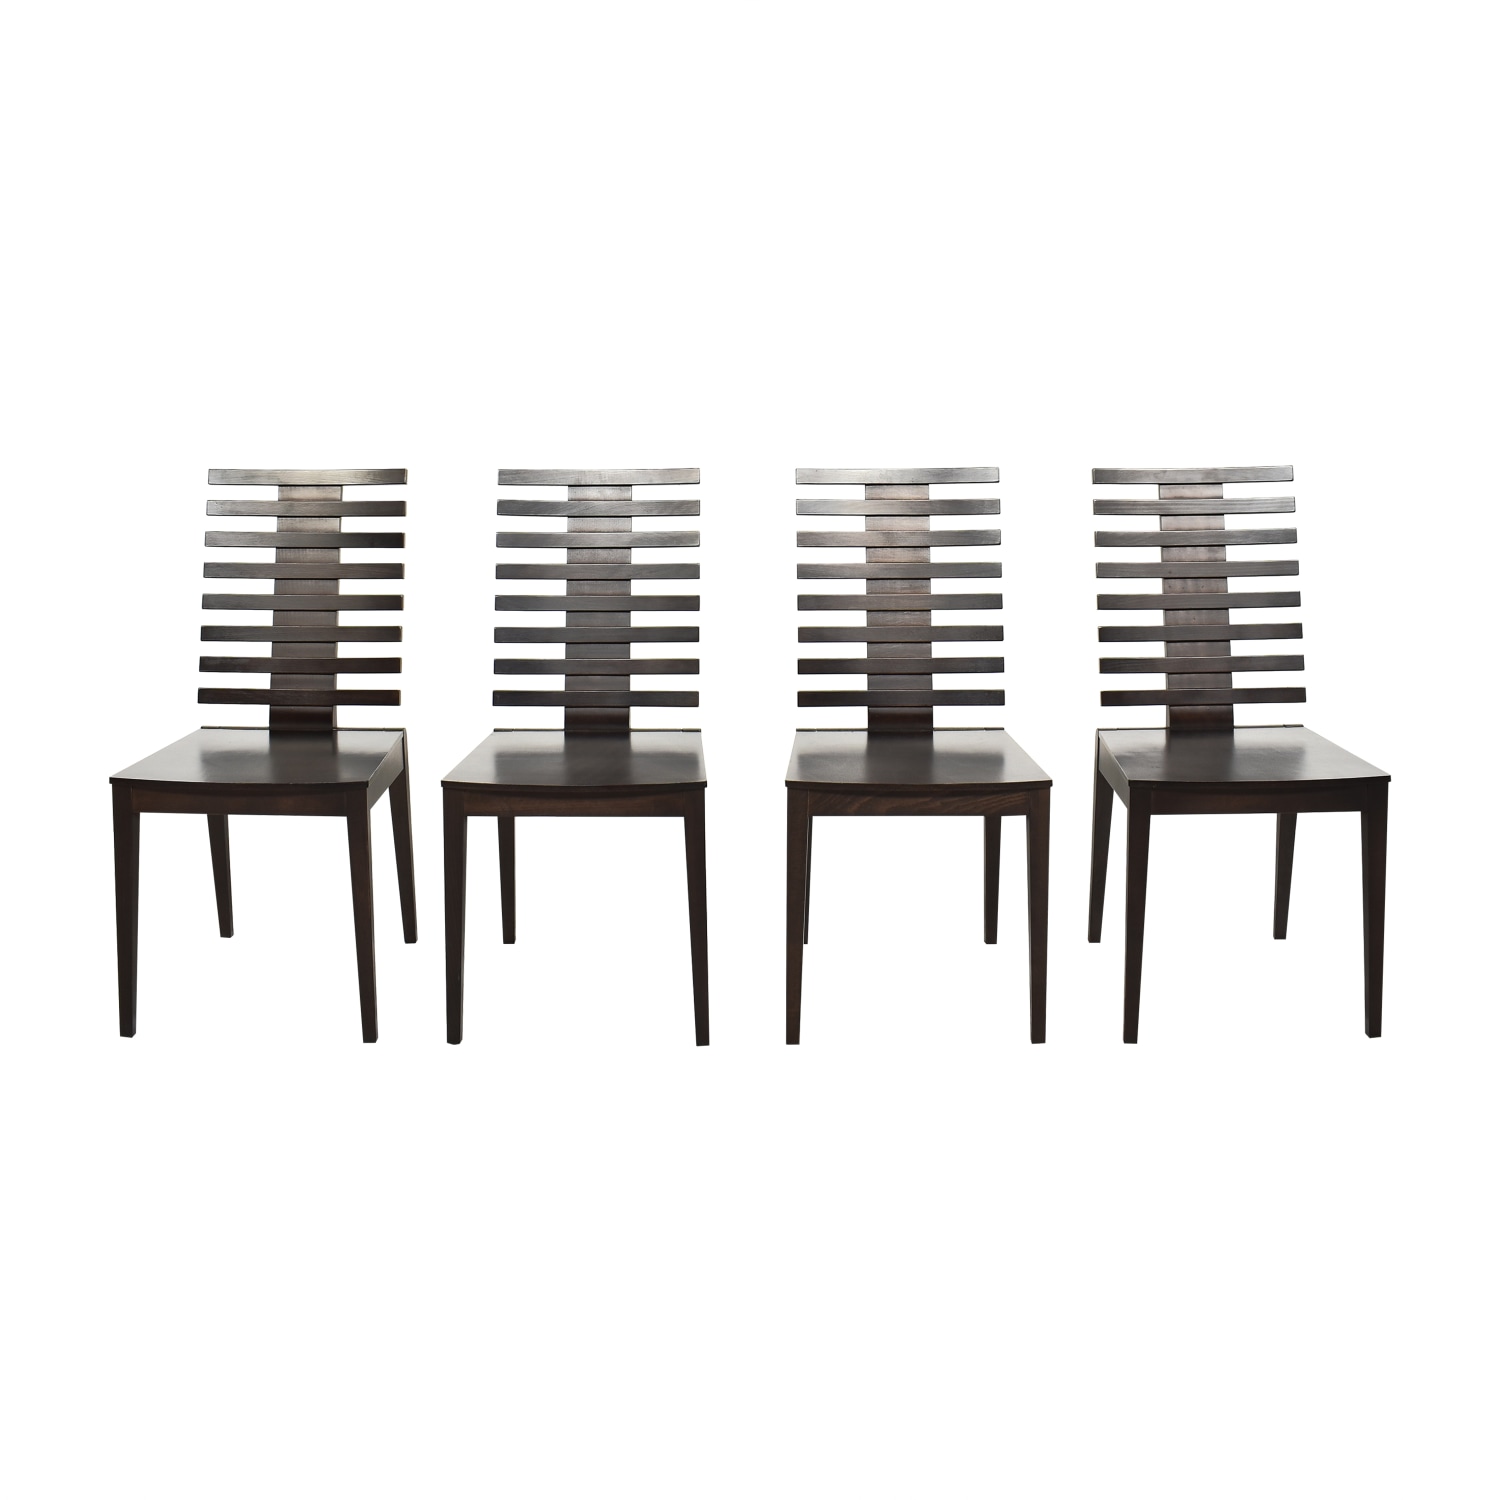  Contemporary Dining Chairs dimensions